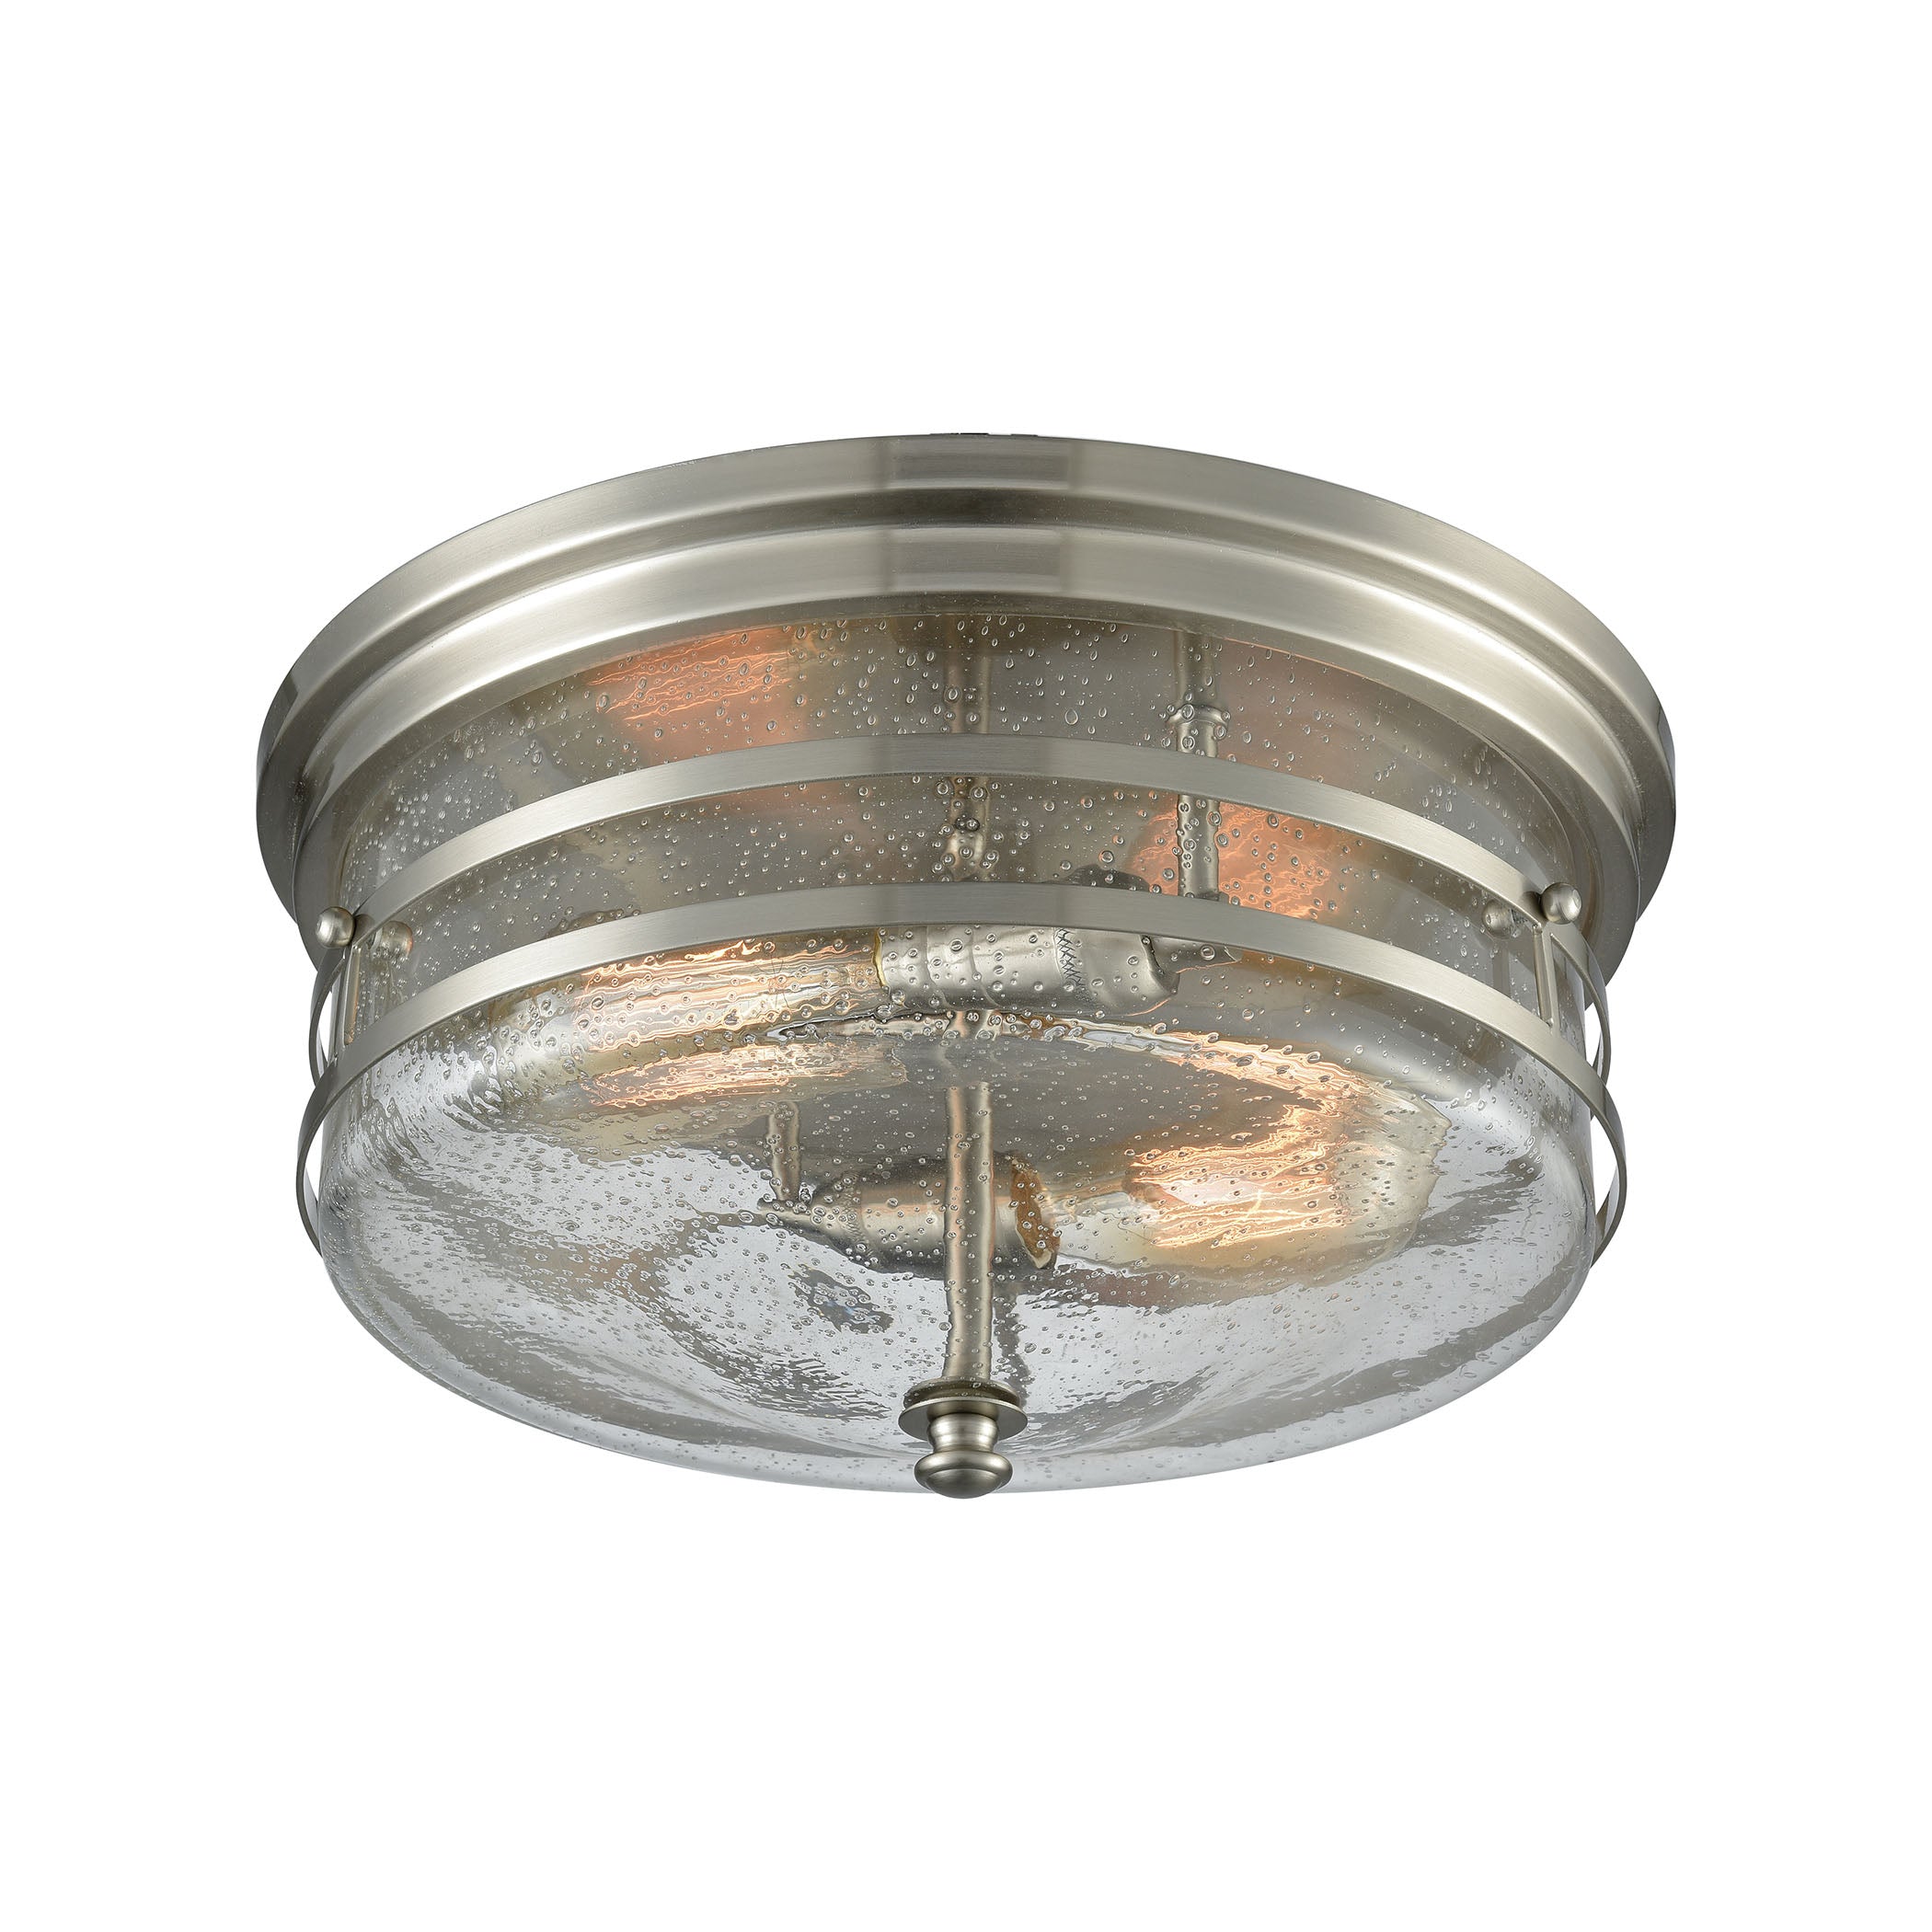 ELK Lighting 11335/2 Port O'Connor 2-Light Flush Mount in Satin Nickel with Clear Seedy Glass